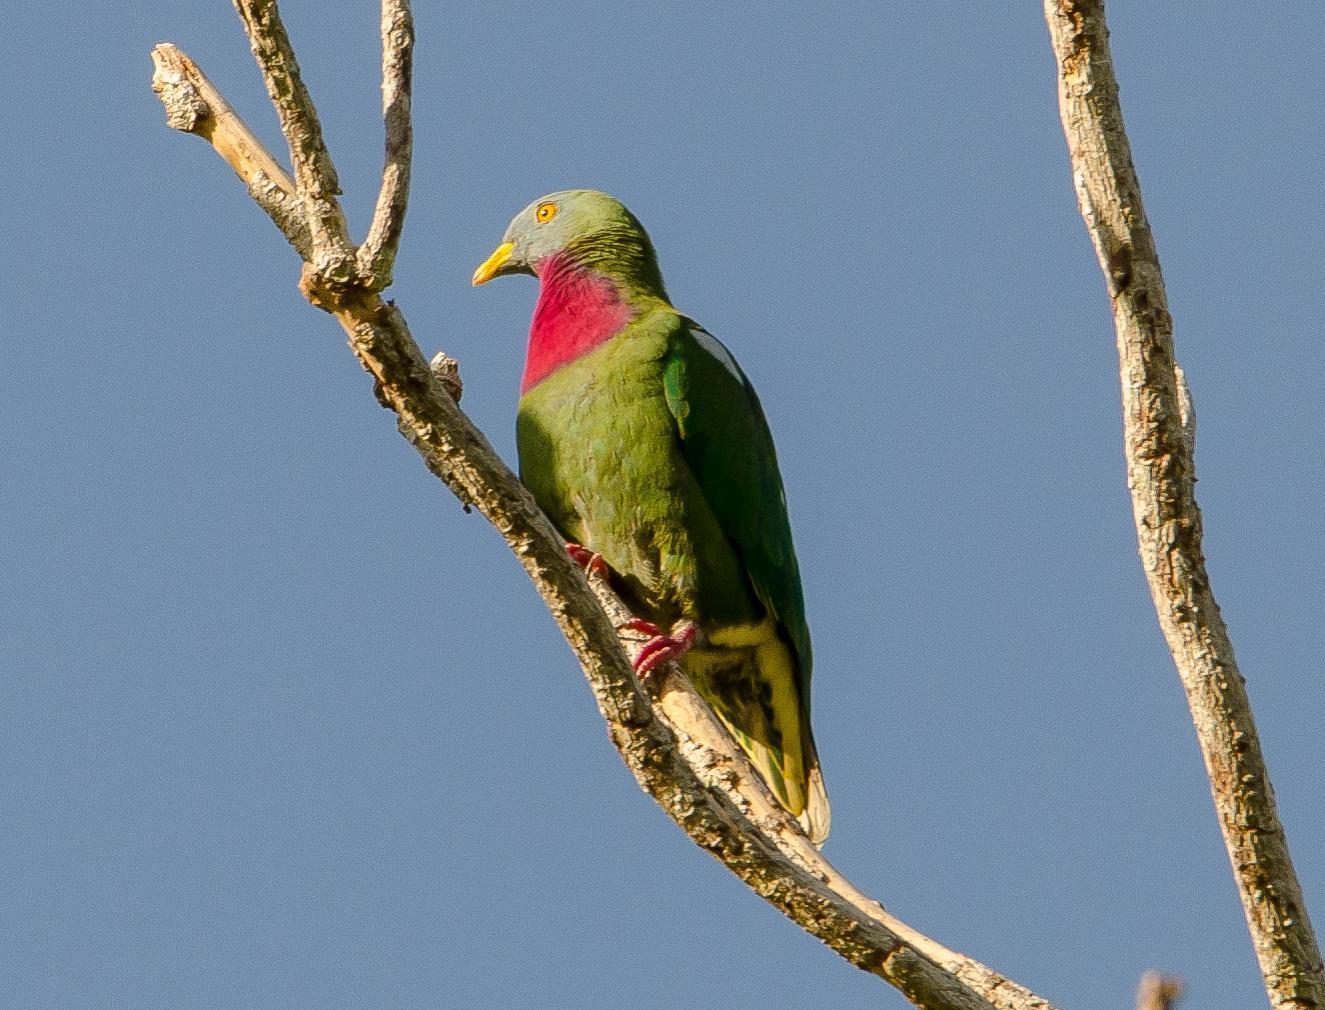 Claret-breasted Fruit-Dove Photo by Brian Thistleton